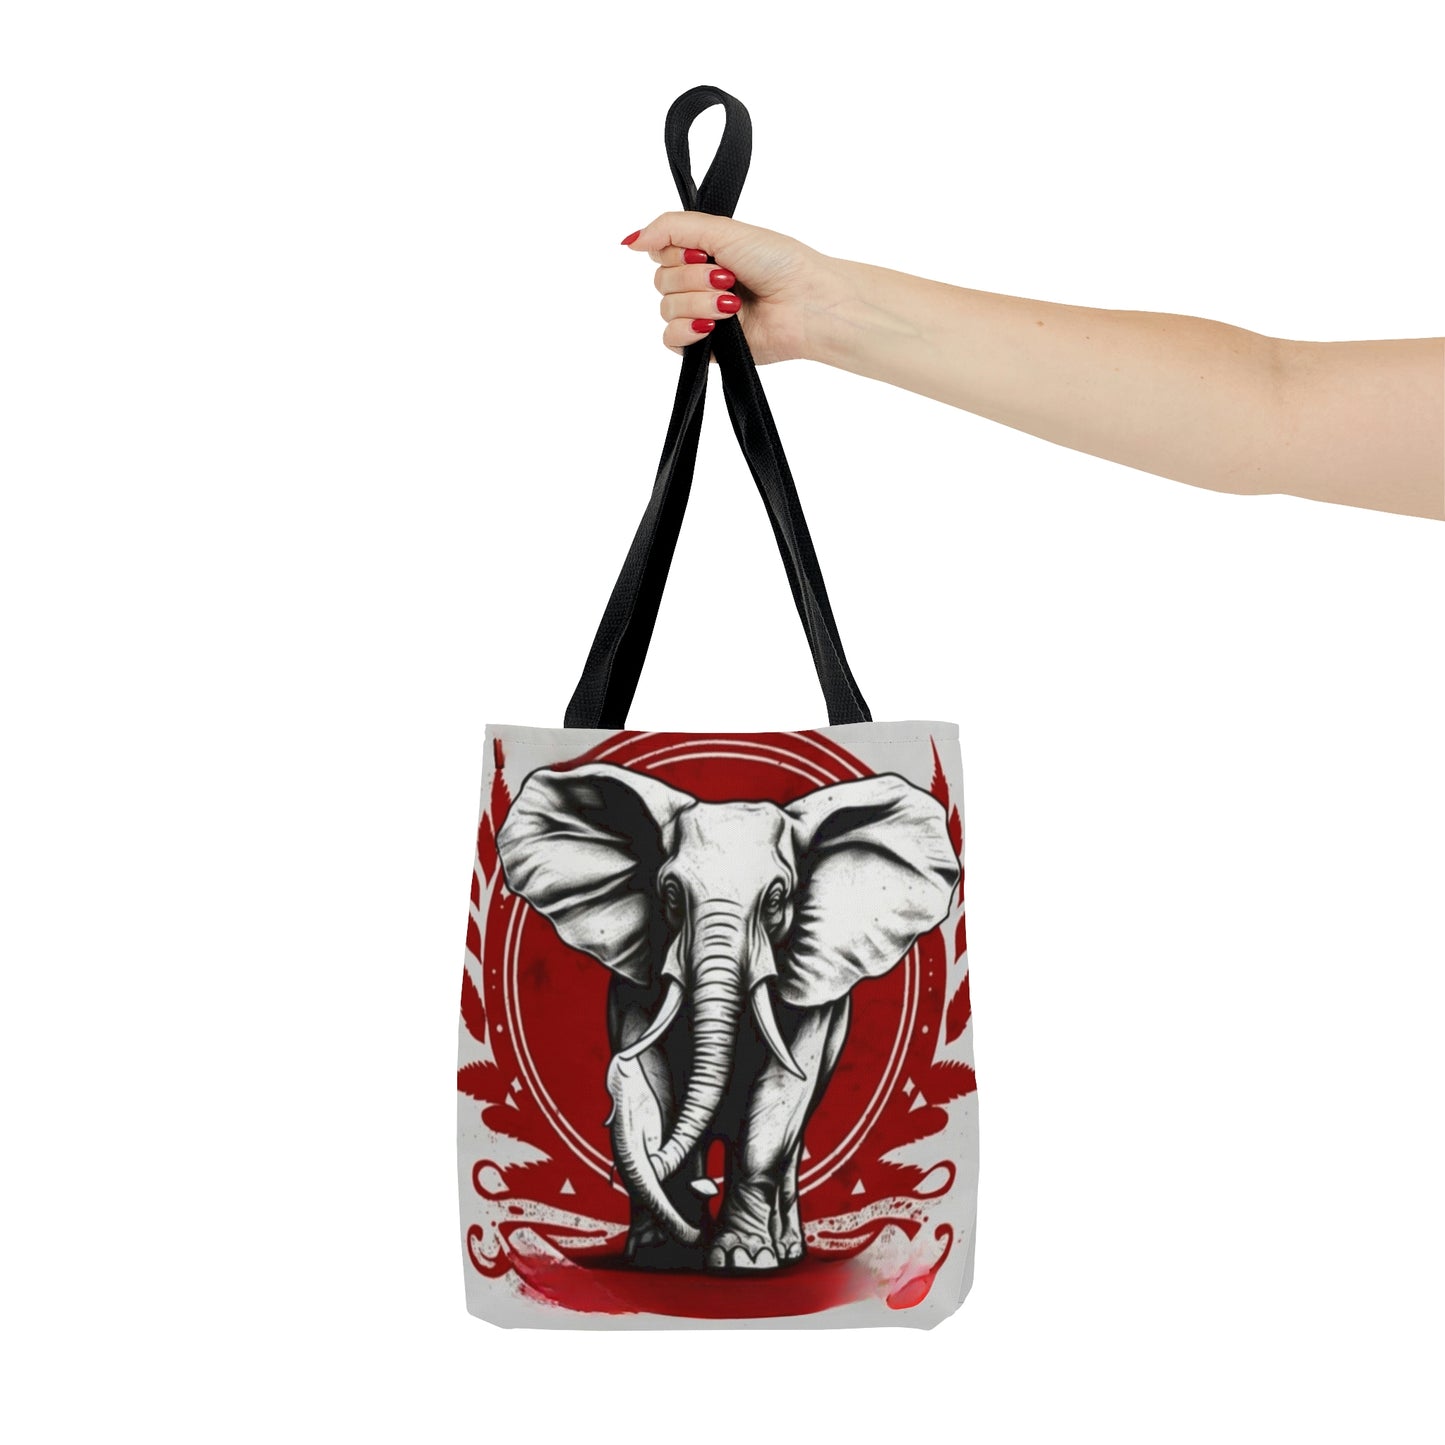 Trunk Up Tote Bag